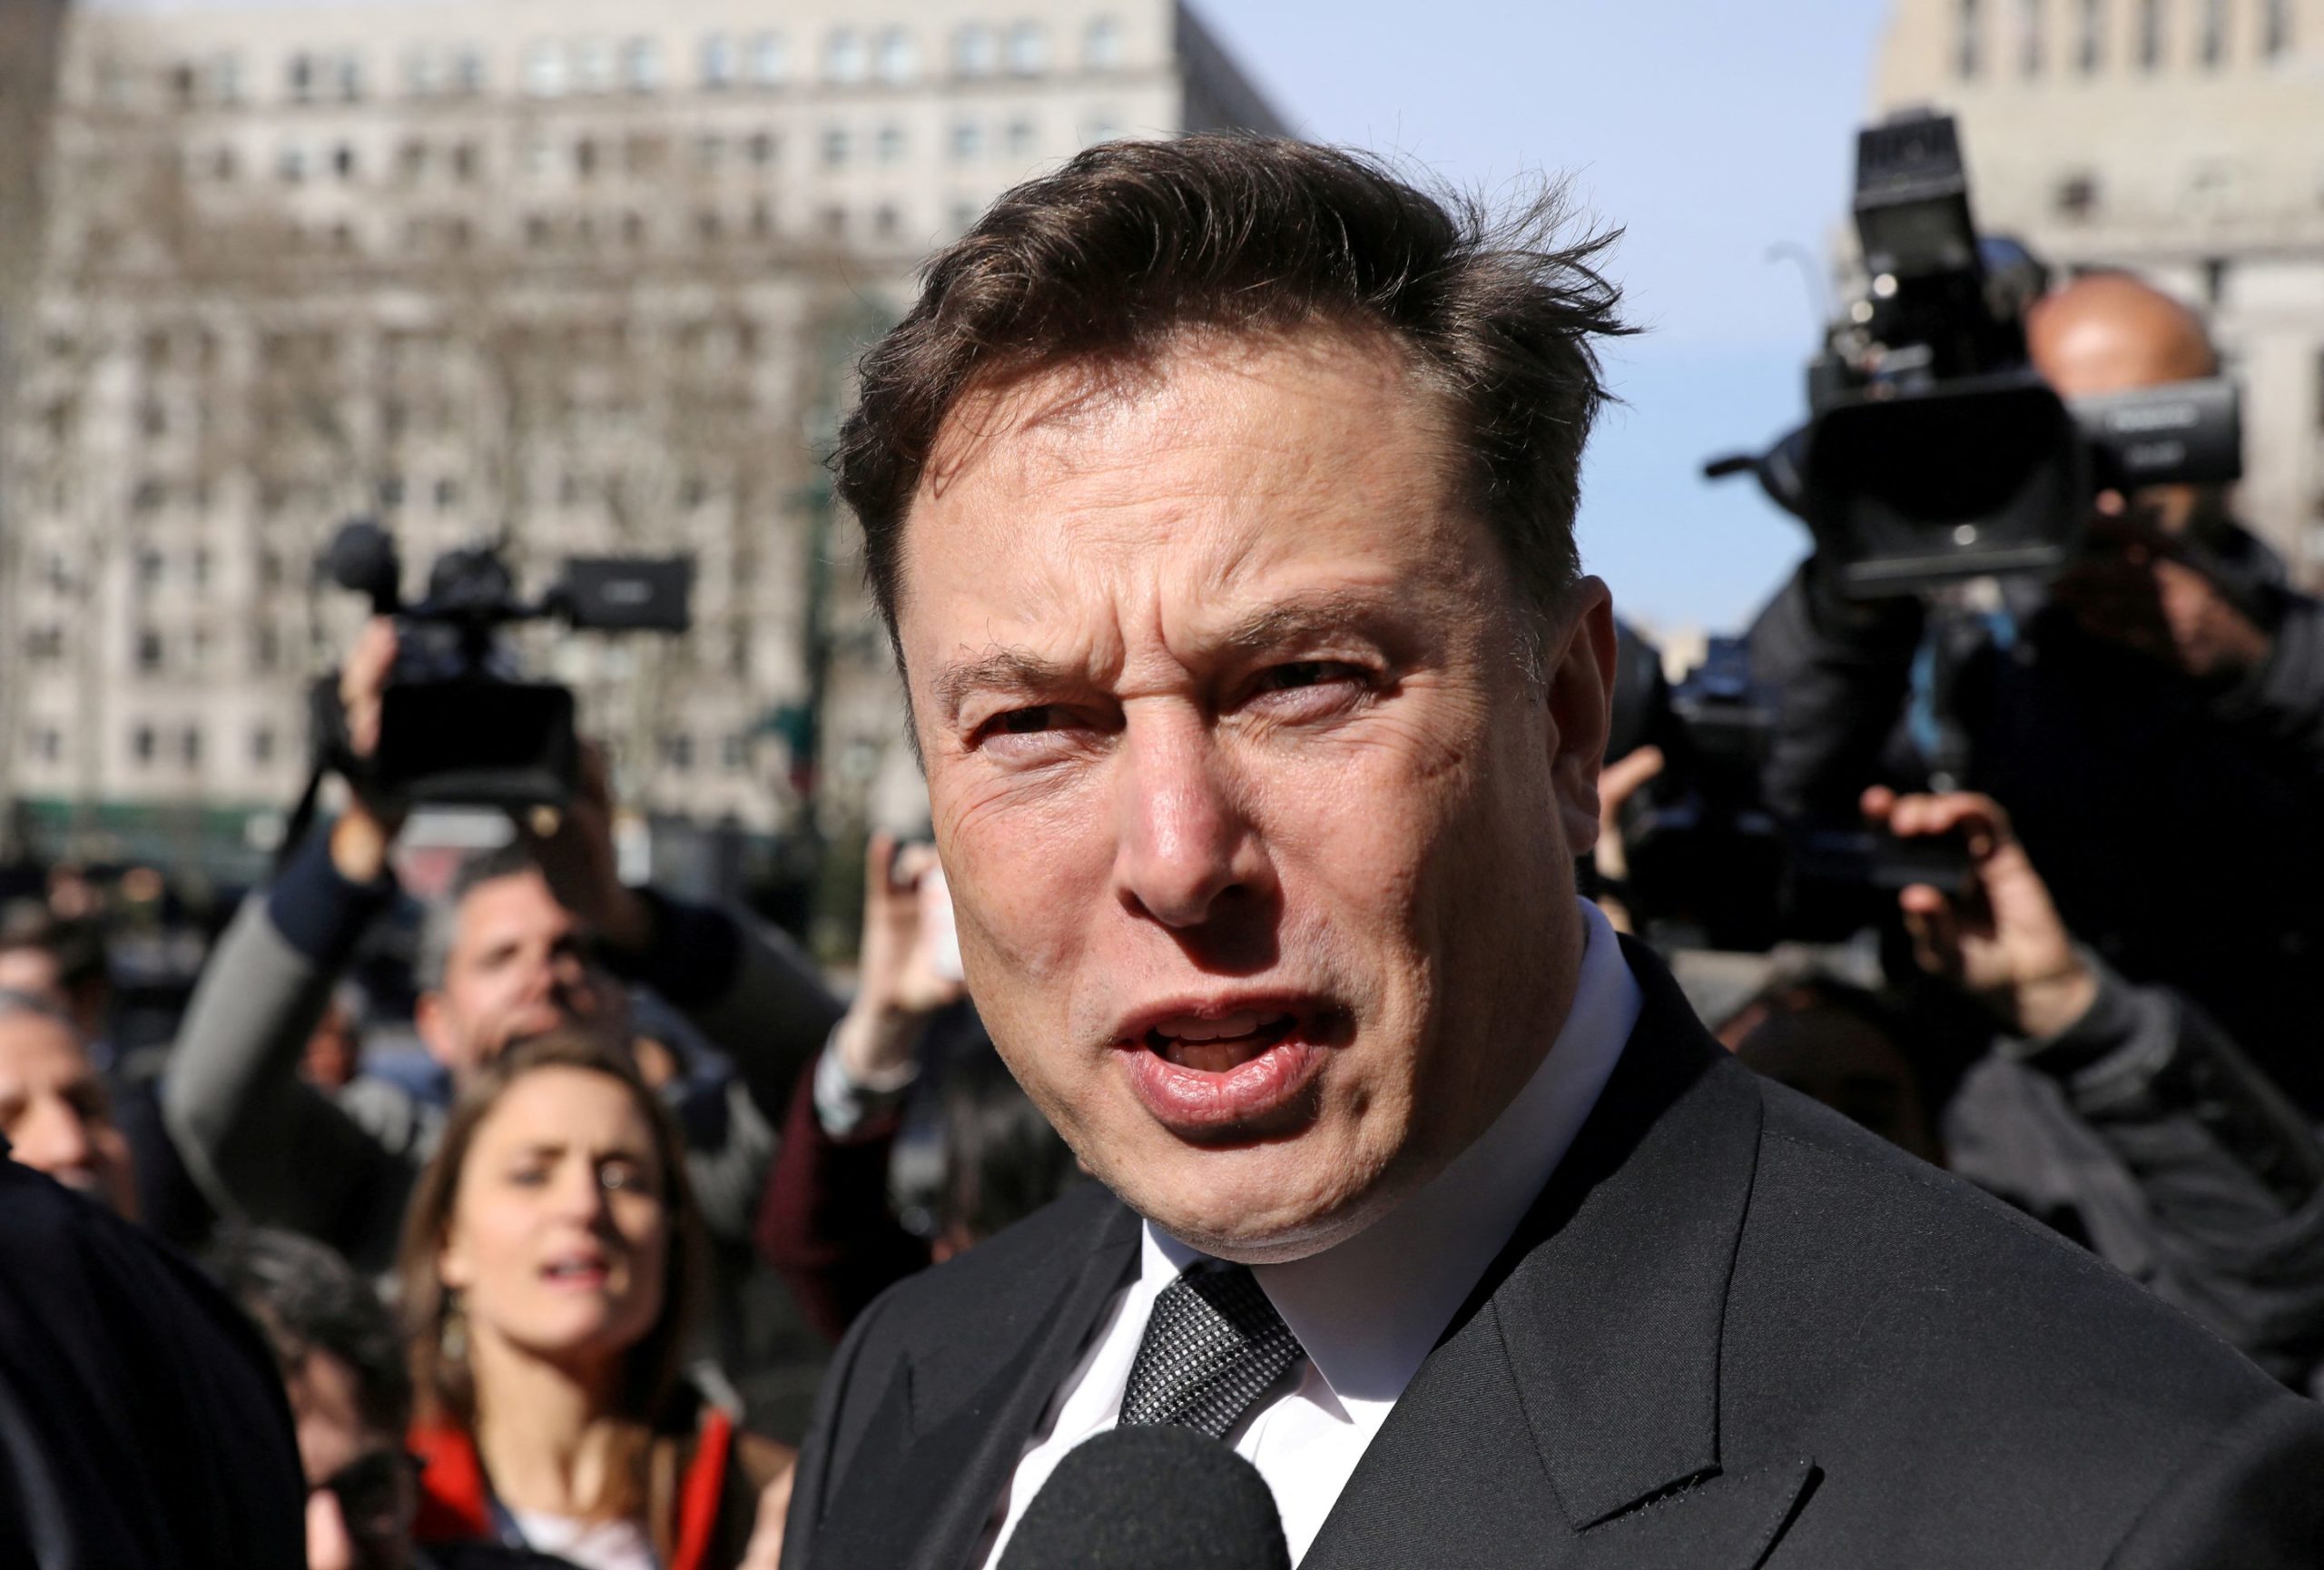 Why Elon Musk wants to take Twitter private